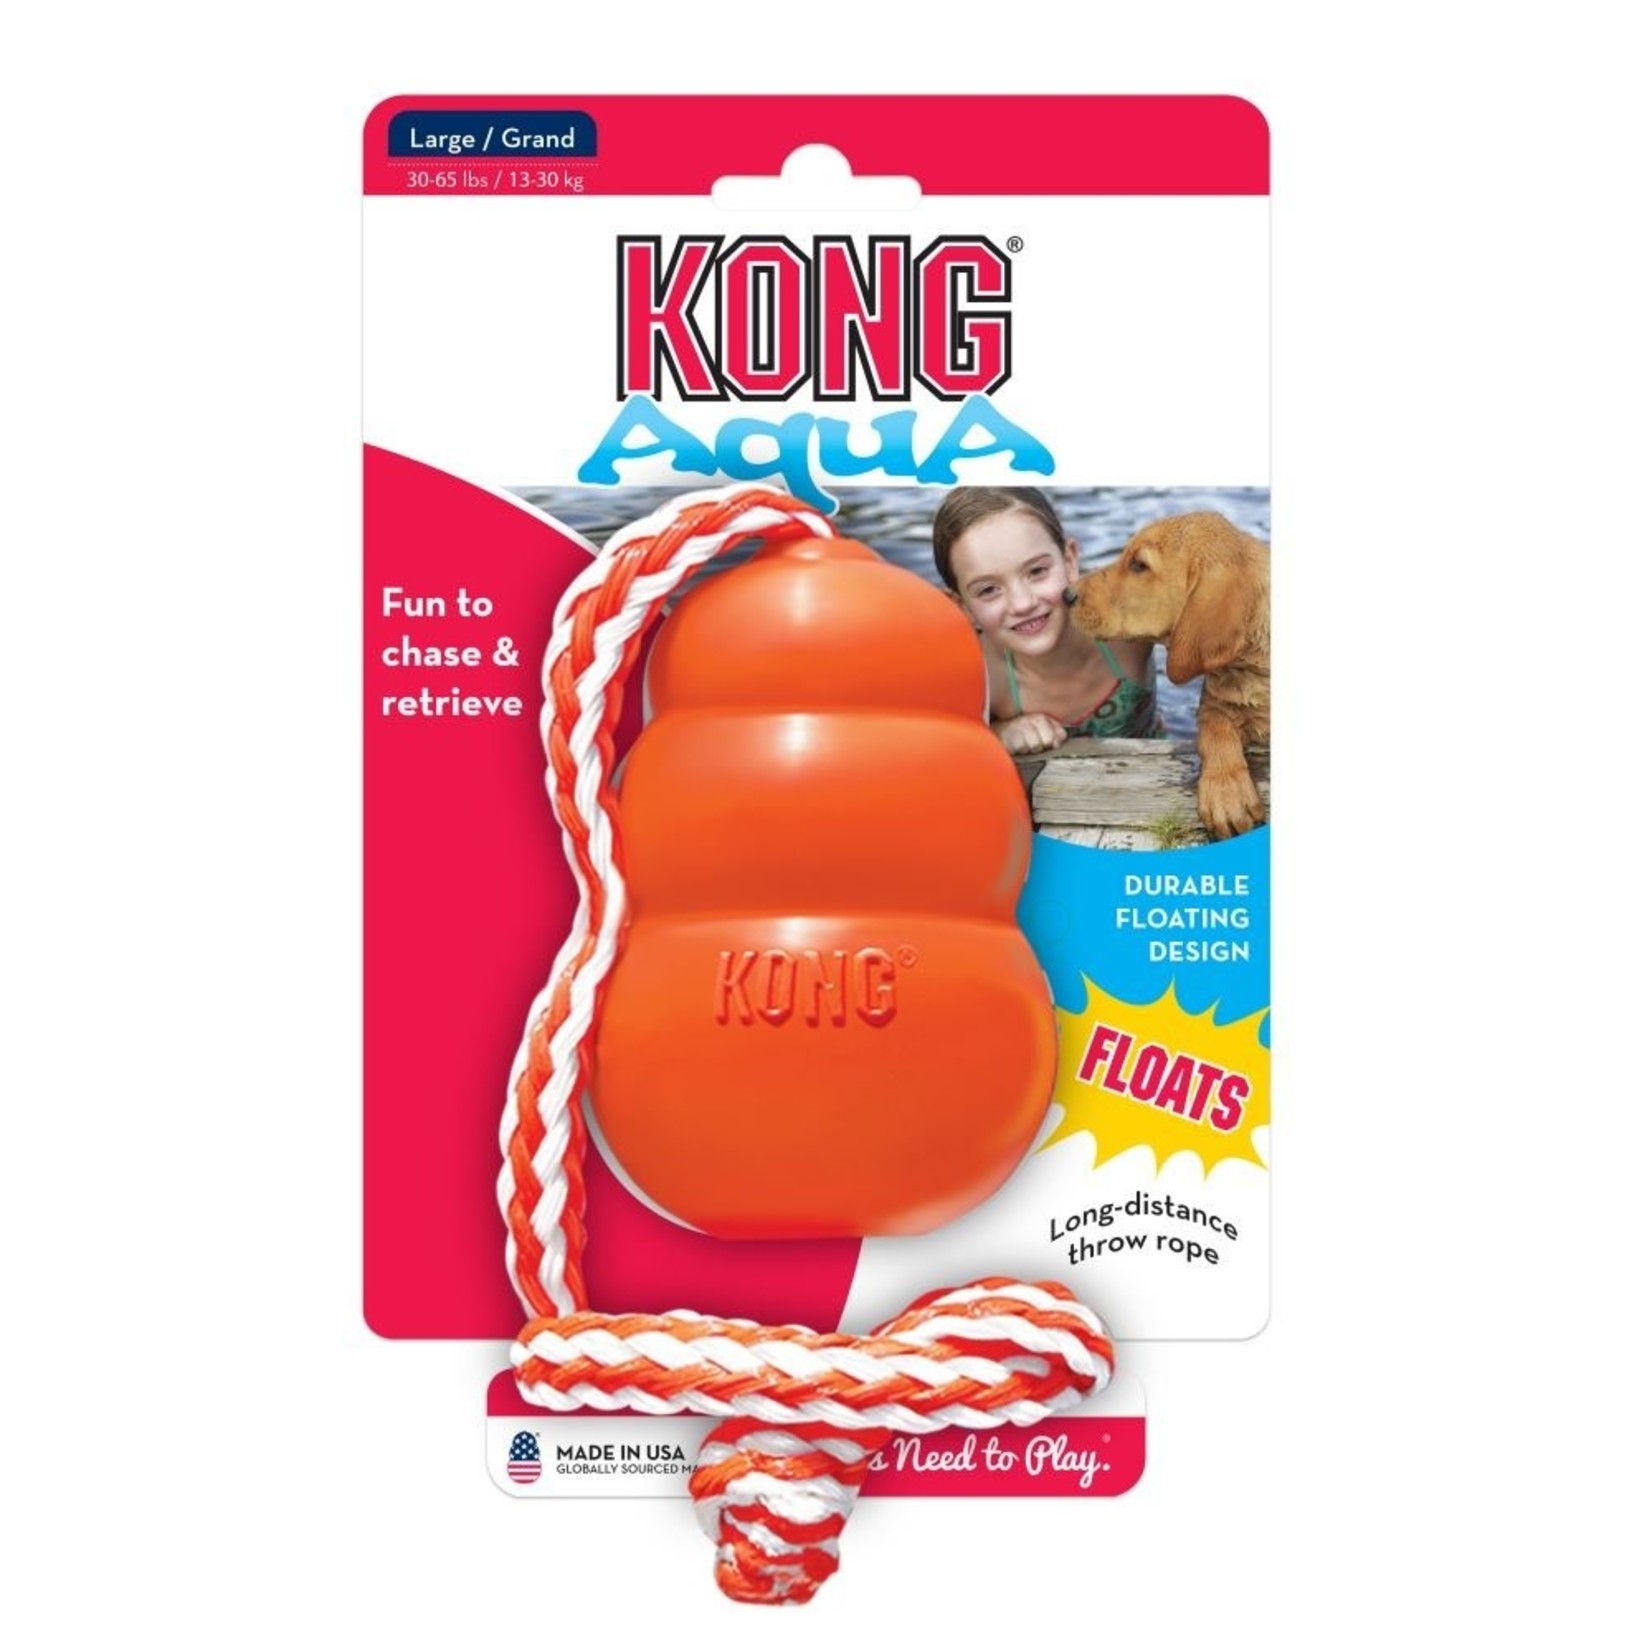 KONG Aqua Cool Floating Dog Toy with Rope